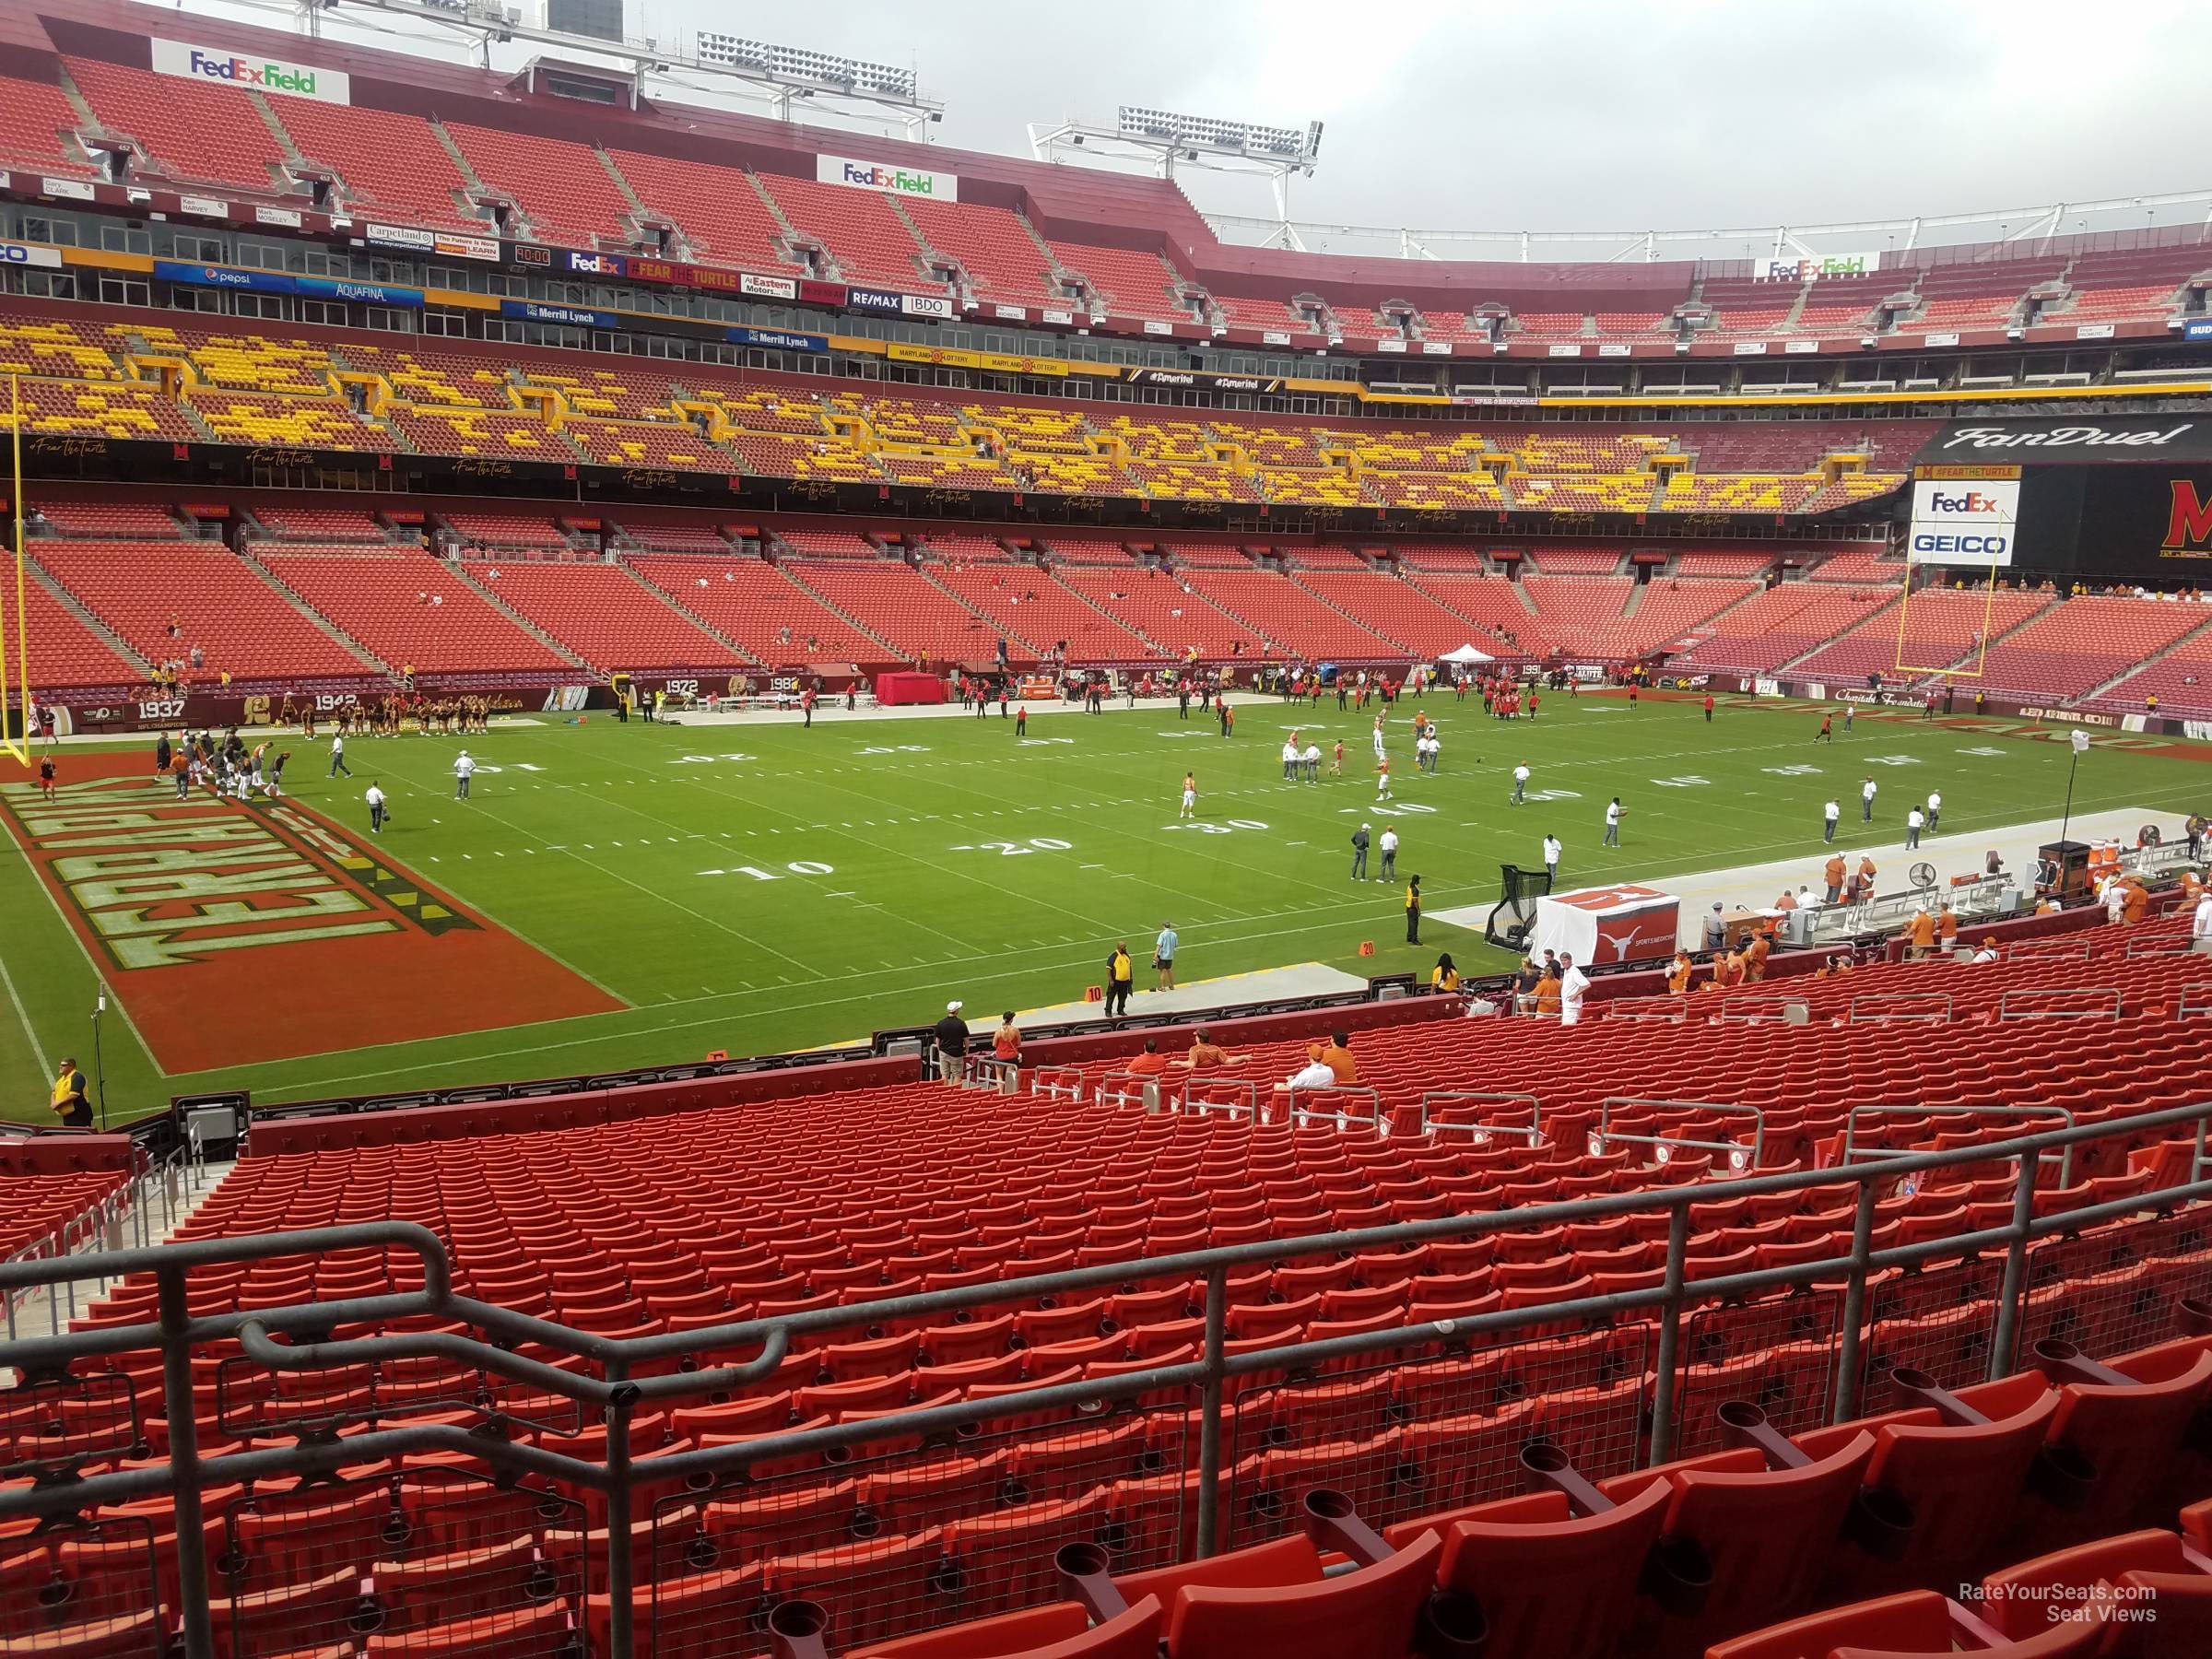 section 226, row 4 seat view  - fedexfield